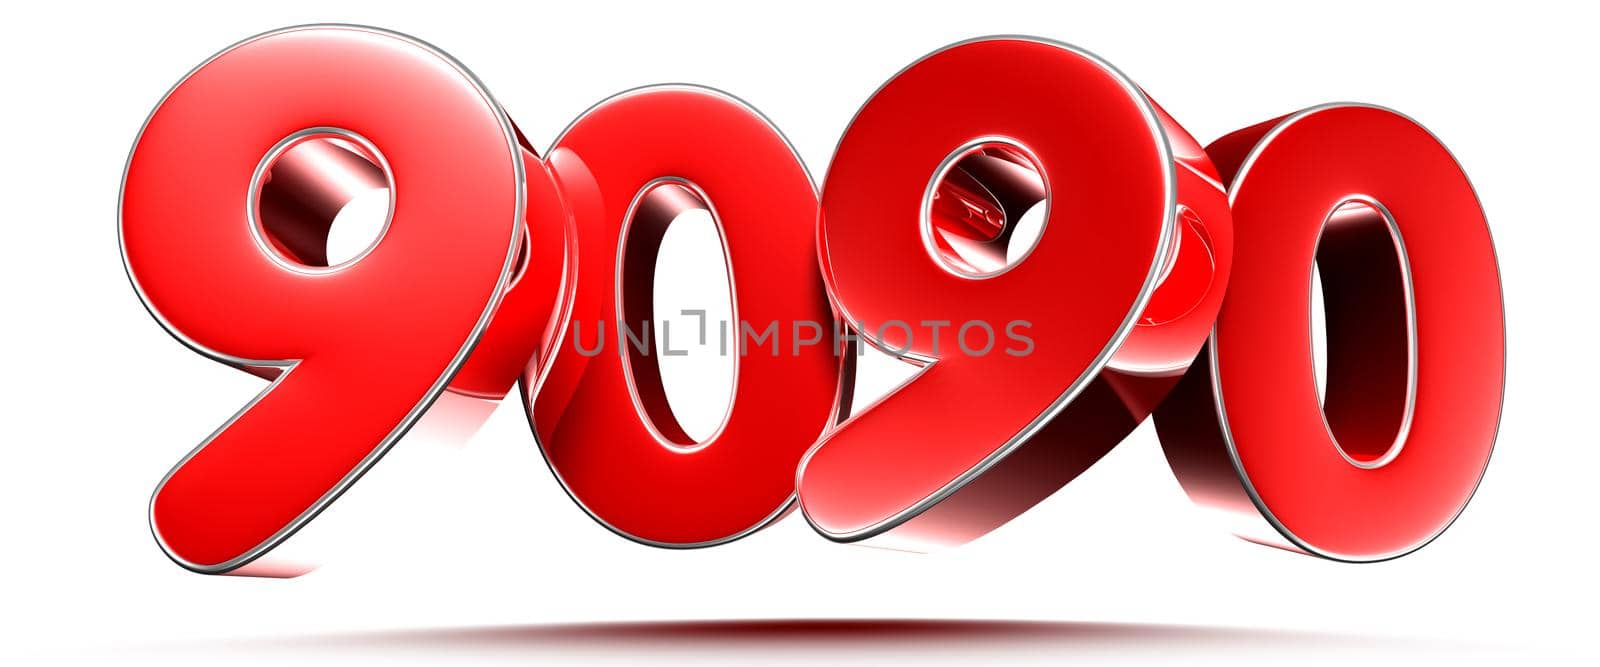 Rounded red numbers 9090 on white background 3D illustration with clipping path